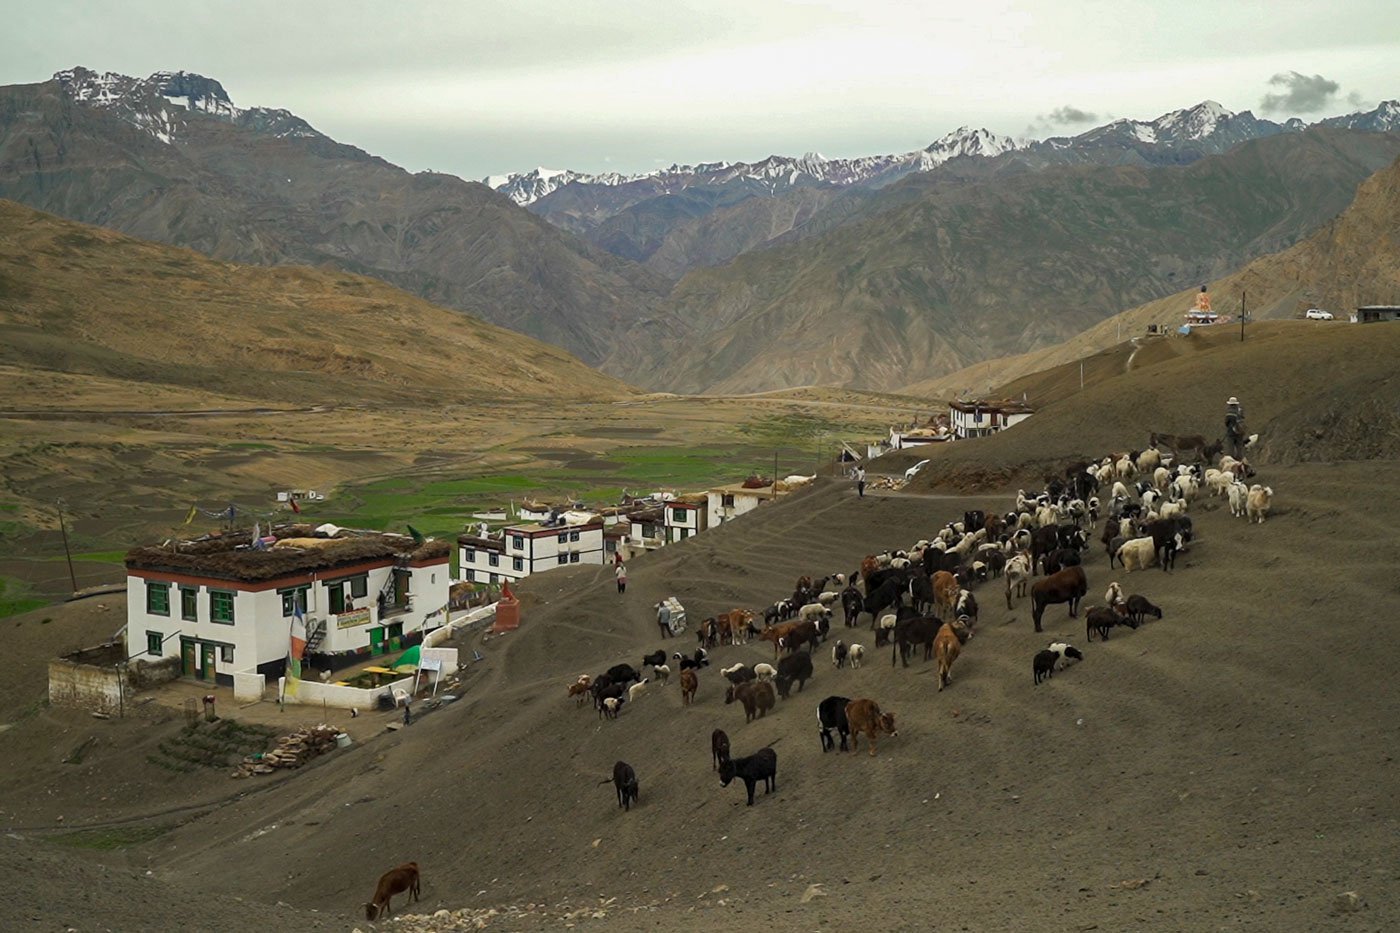 All livestock in the village are gathered together to leave with Chhering and others to graze in the mountains